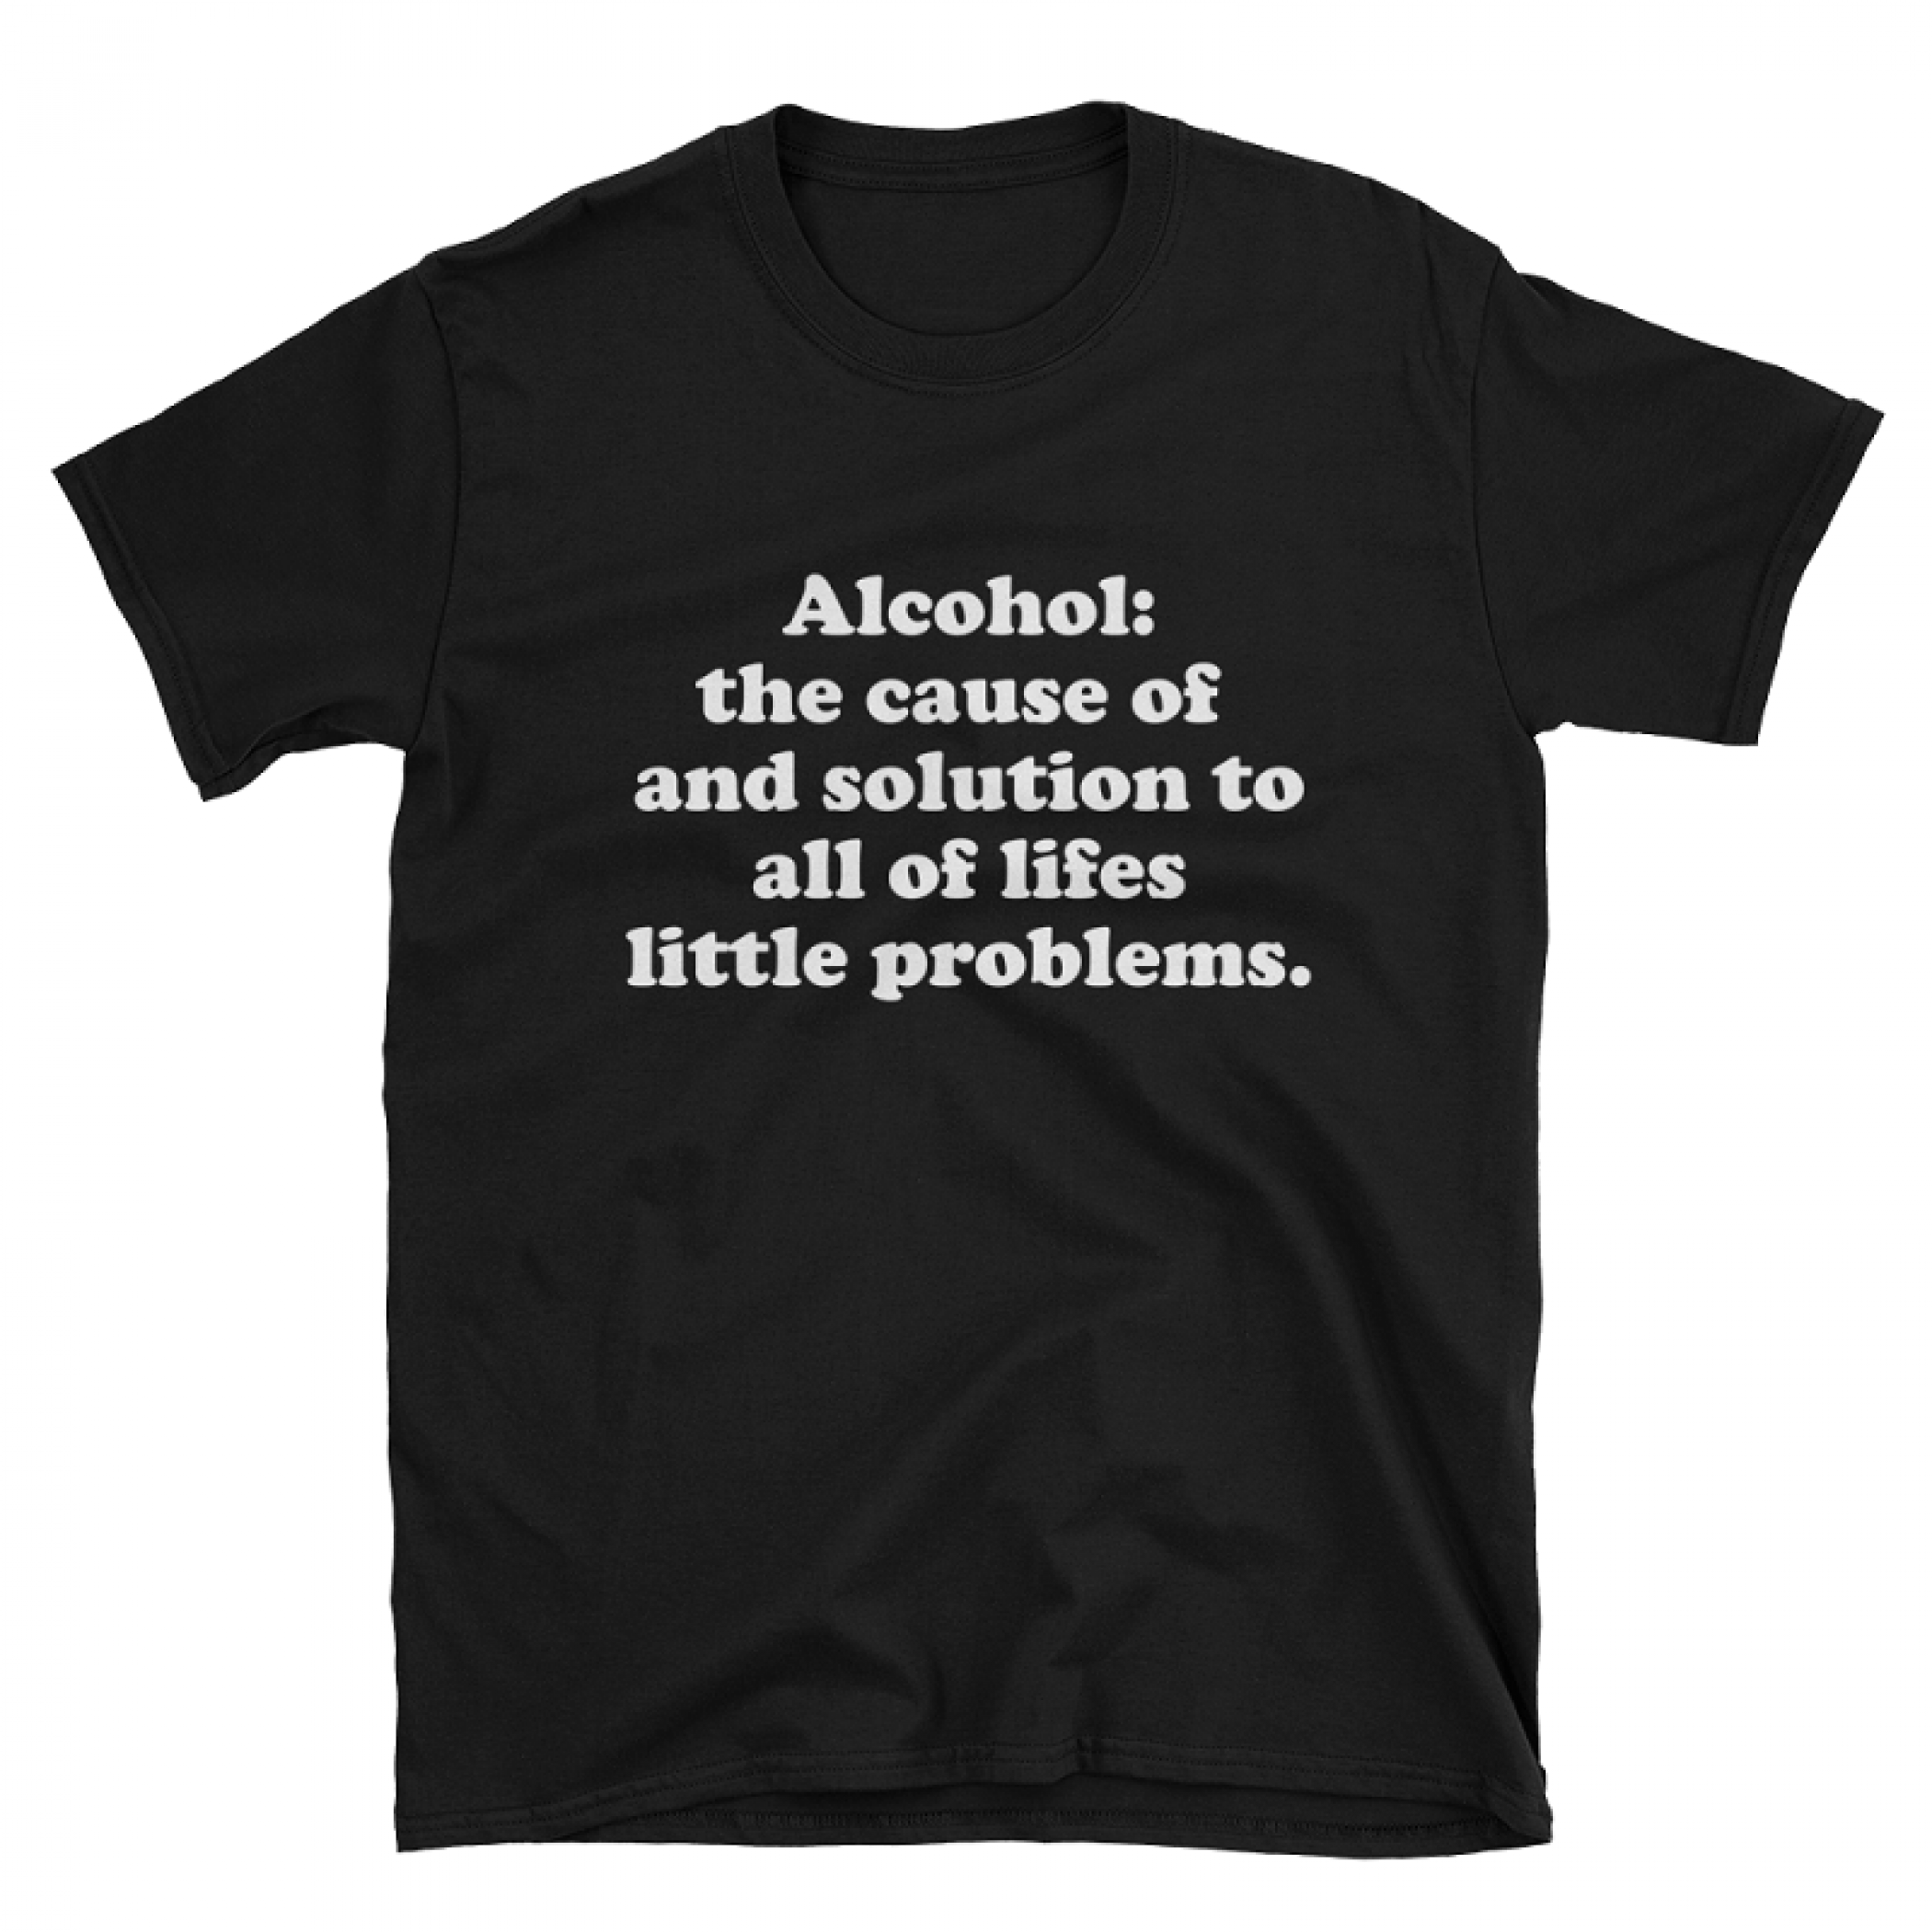 Alcohol The Cause of and Solution to Lifes Little Problems Tshirt